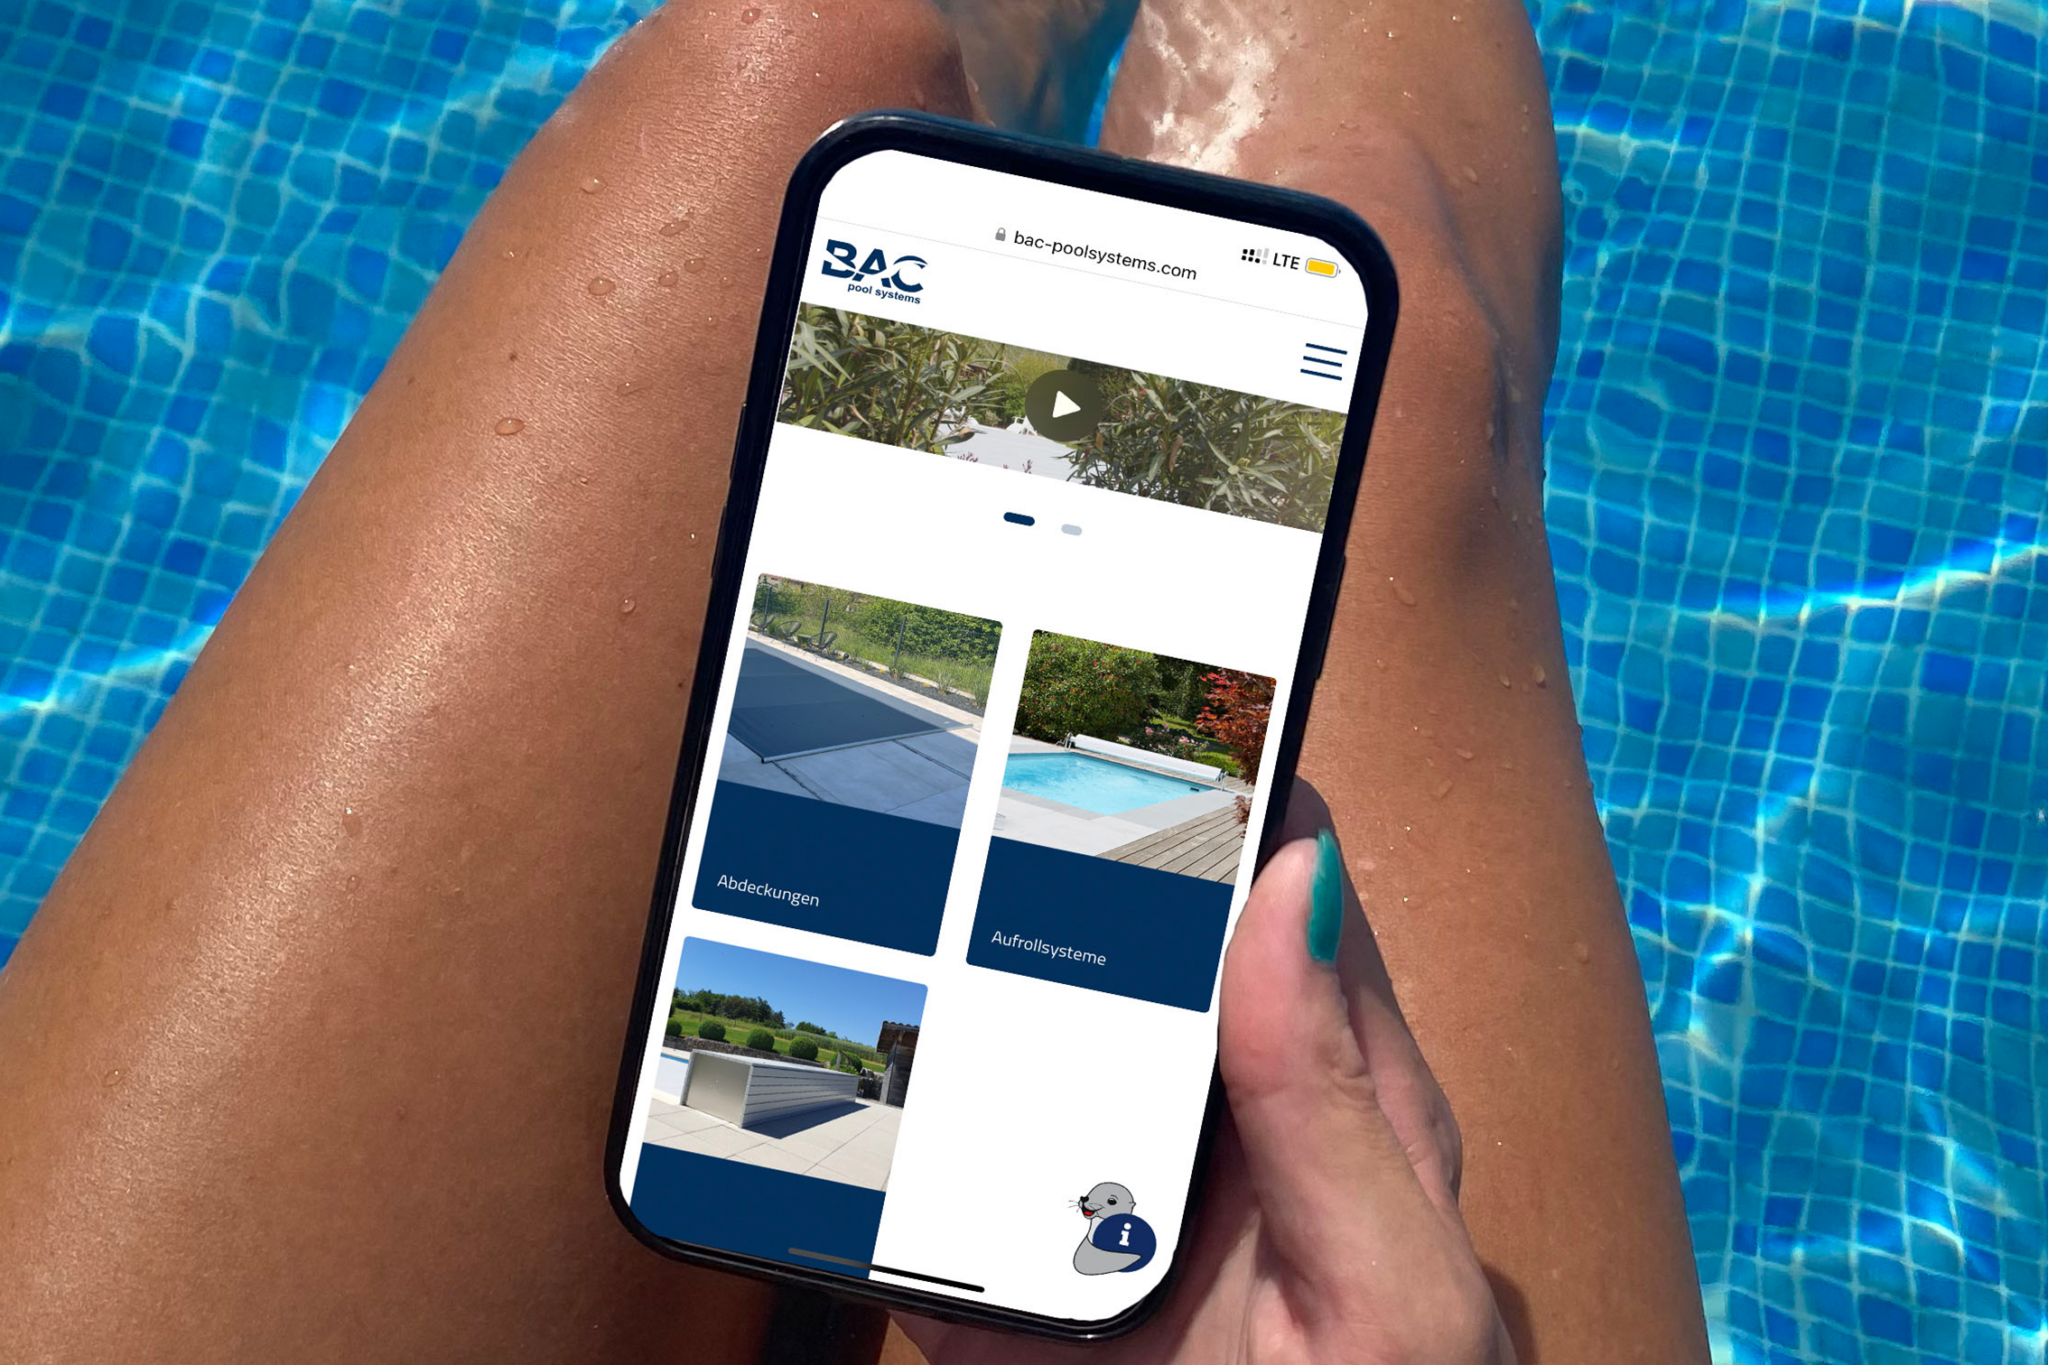 BAC pool systems Homepage auf Smartphone